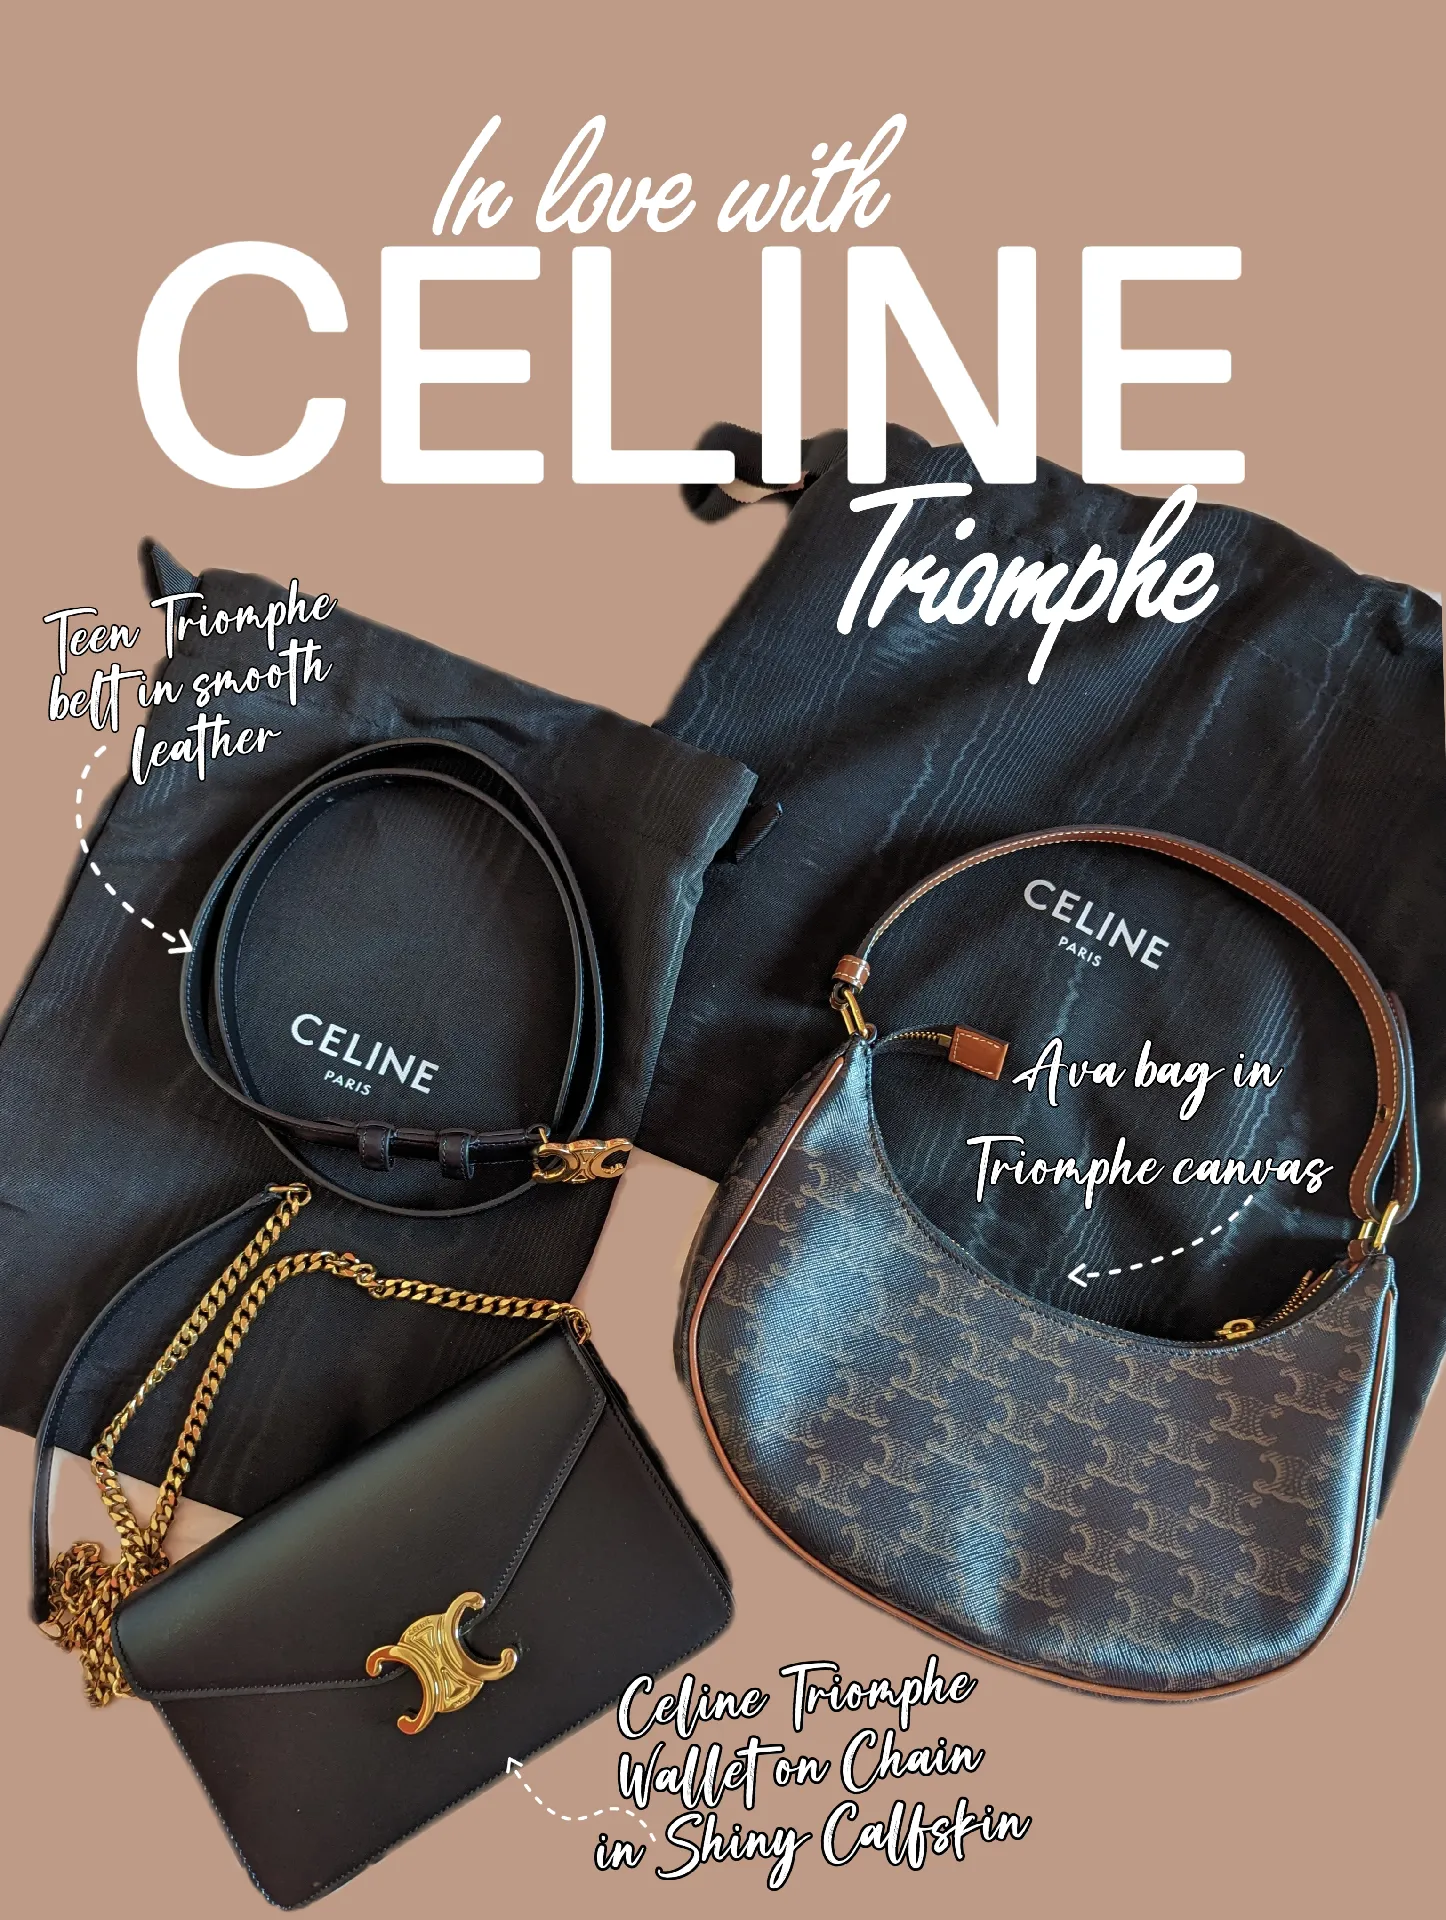 Here's Even More Mini Triomphe Bags From Celine To Love